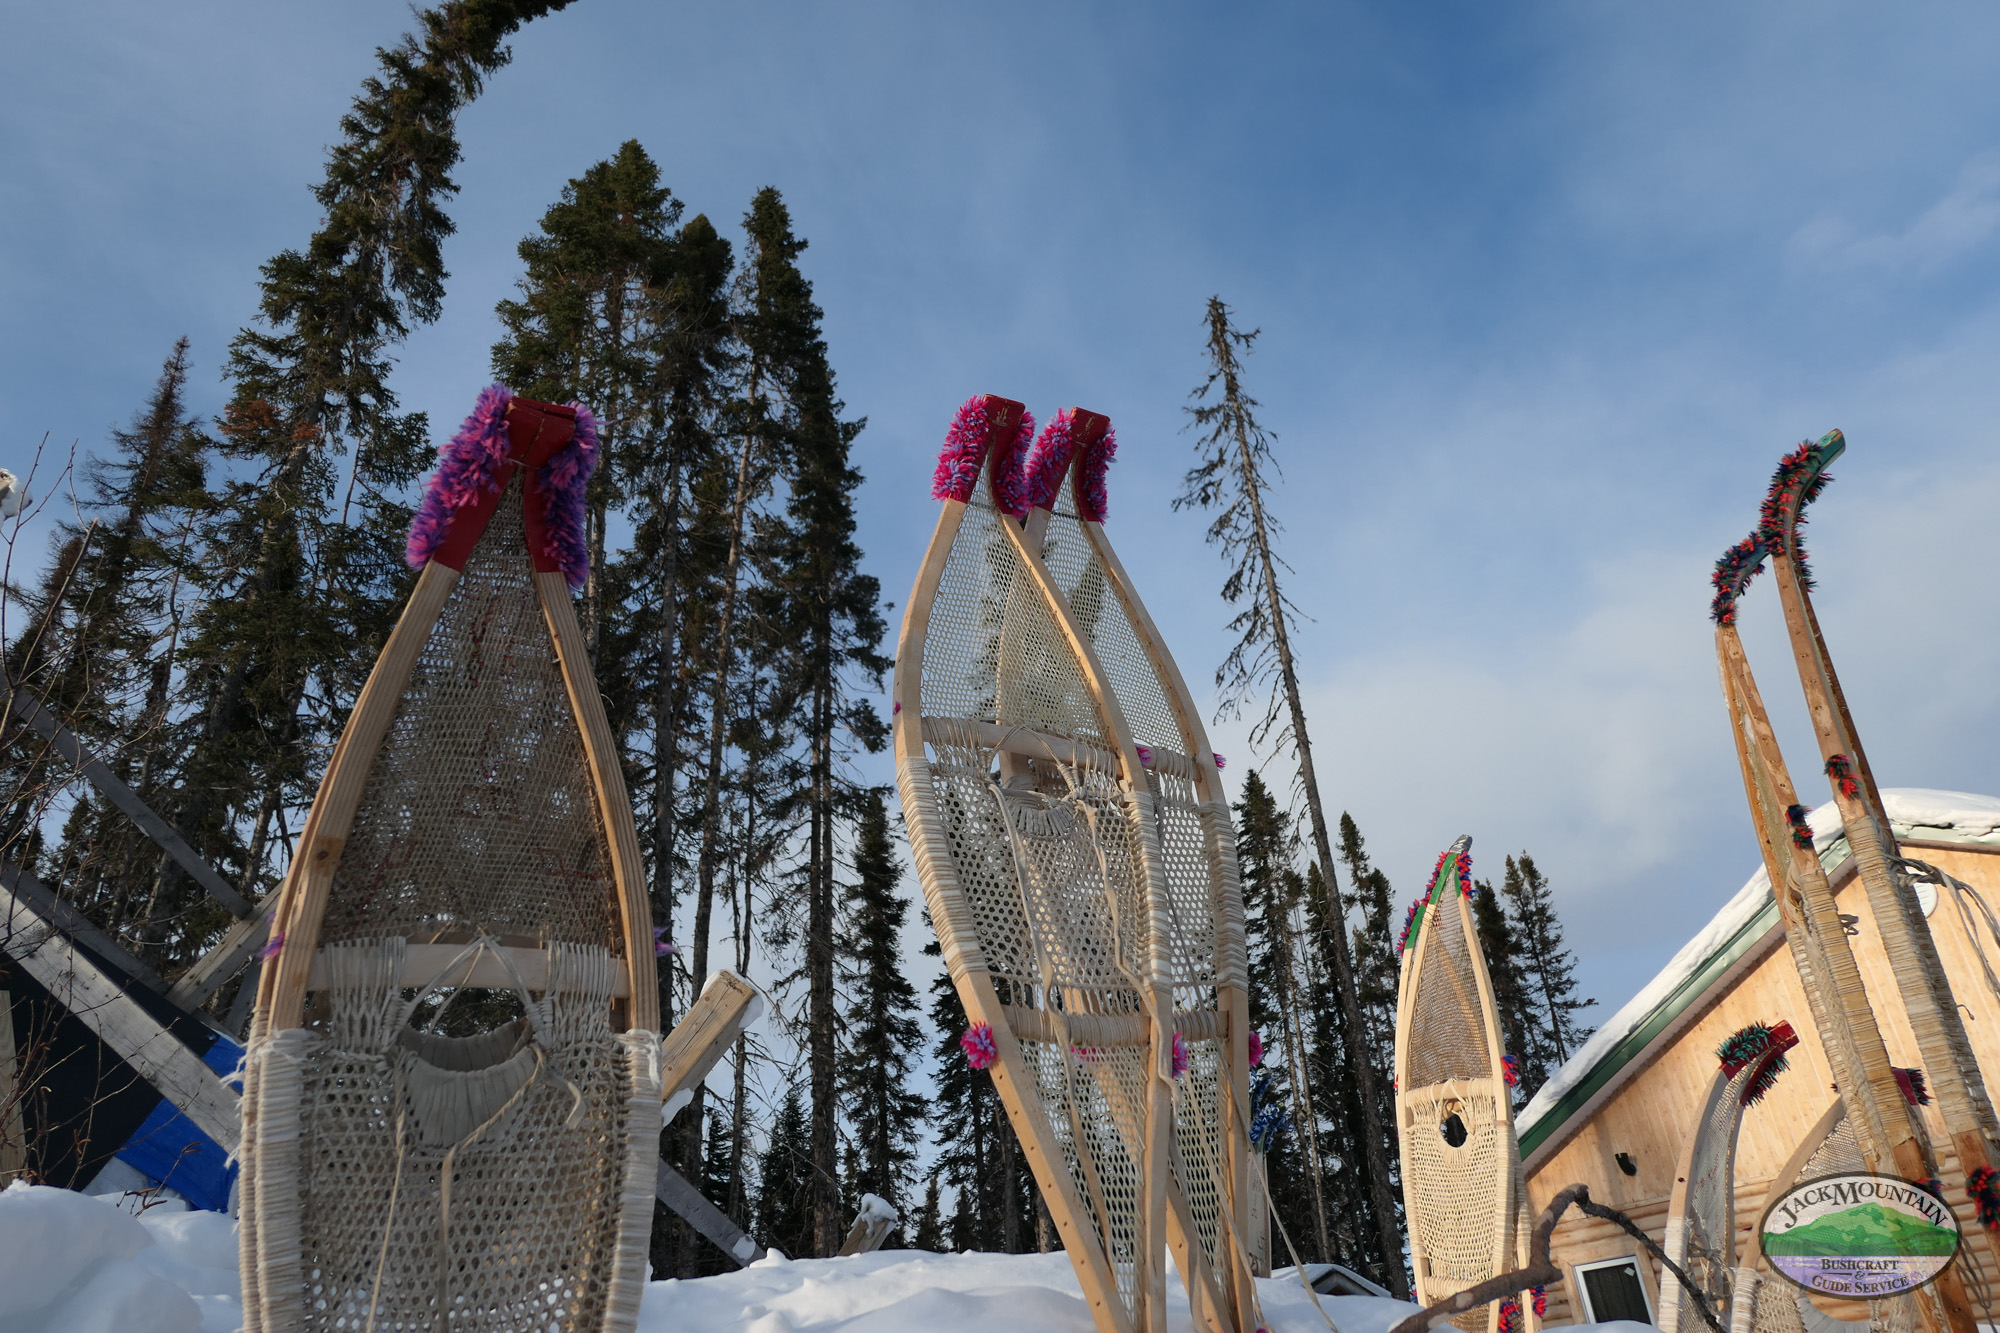 Update On Snowshoe Sizing And Finding Large, Traditional Snowshoes